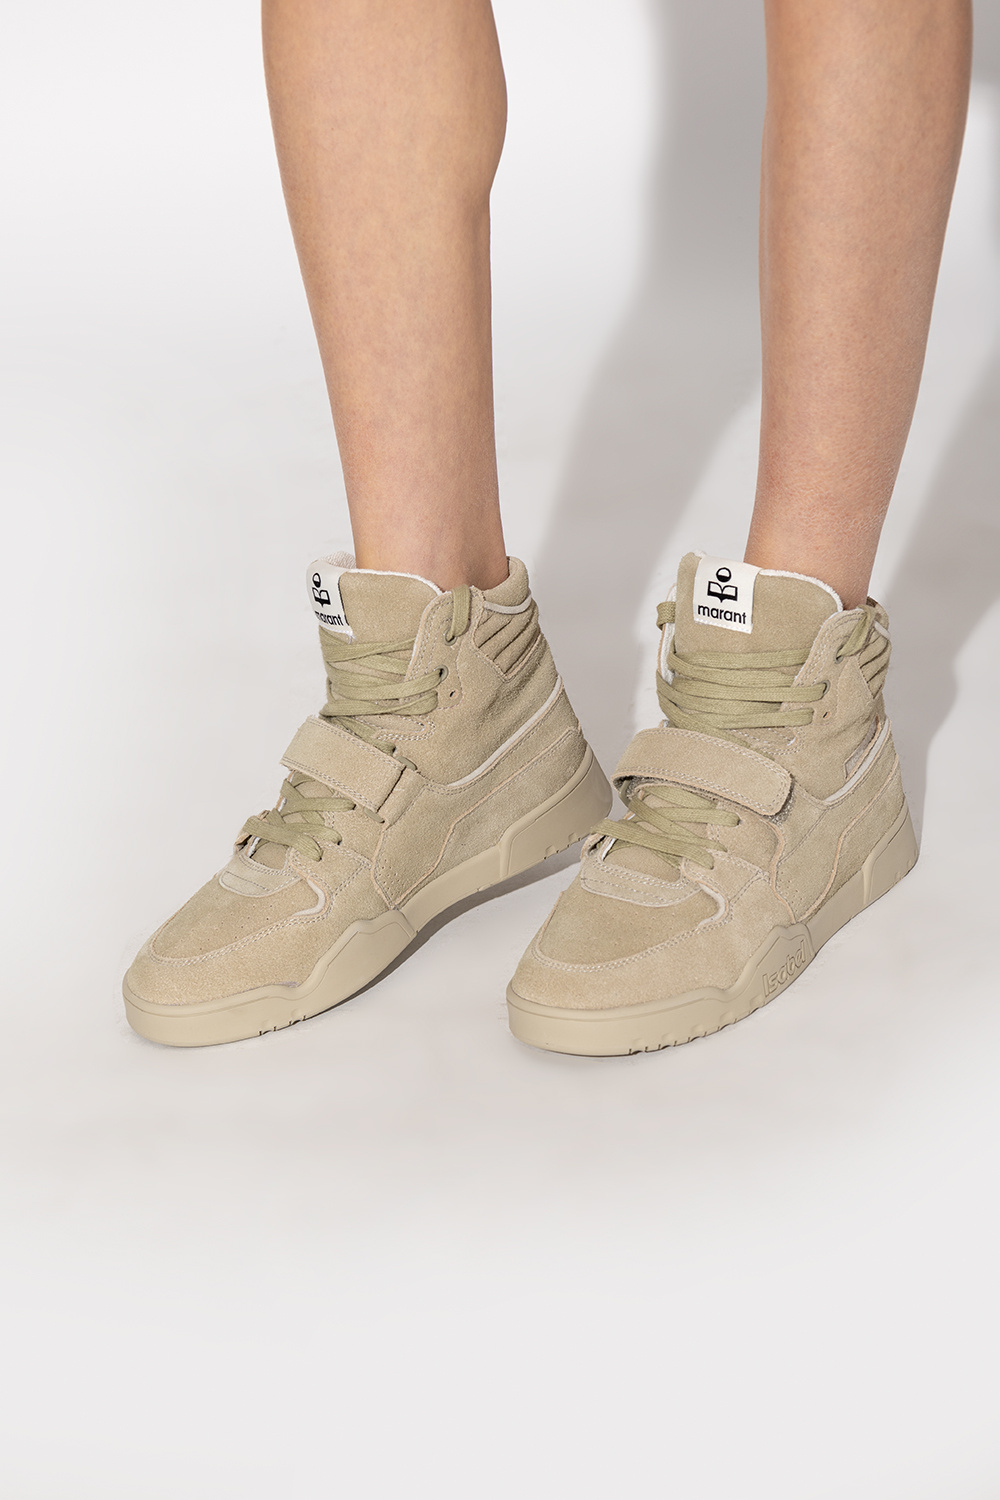 Marant 'Alsee' high | Champs Sports Shoe 2 for $89.99 - IetpShops | Women's Shoes - top sneakers